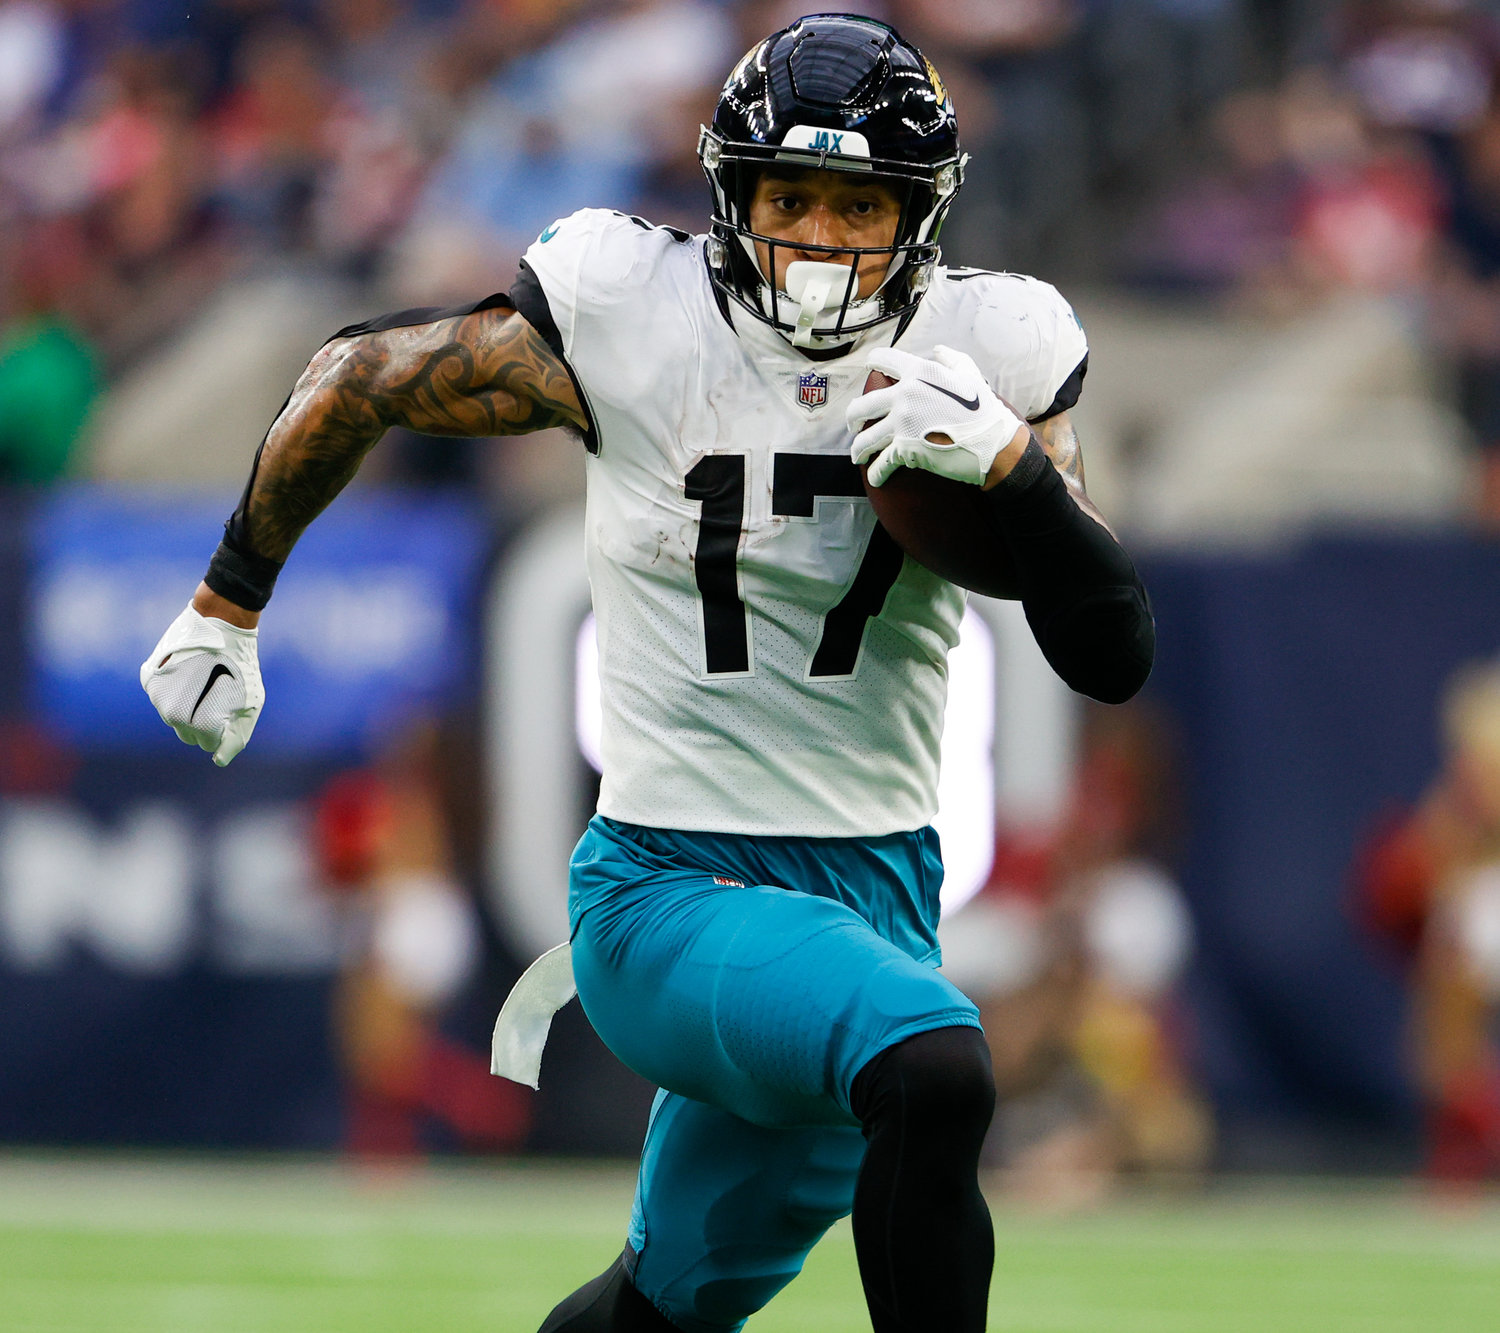 Jaguars tight end Evan Engram (17) carries the ball after a catch during an NFL game between the Houston Texans and the Jacksonville Jaguars on Jan. 1, 2023 in Houston. The Jaguars won, 31-3.